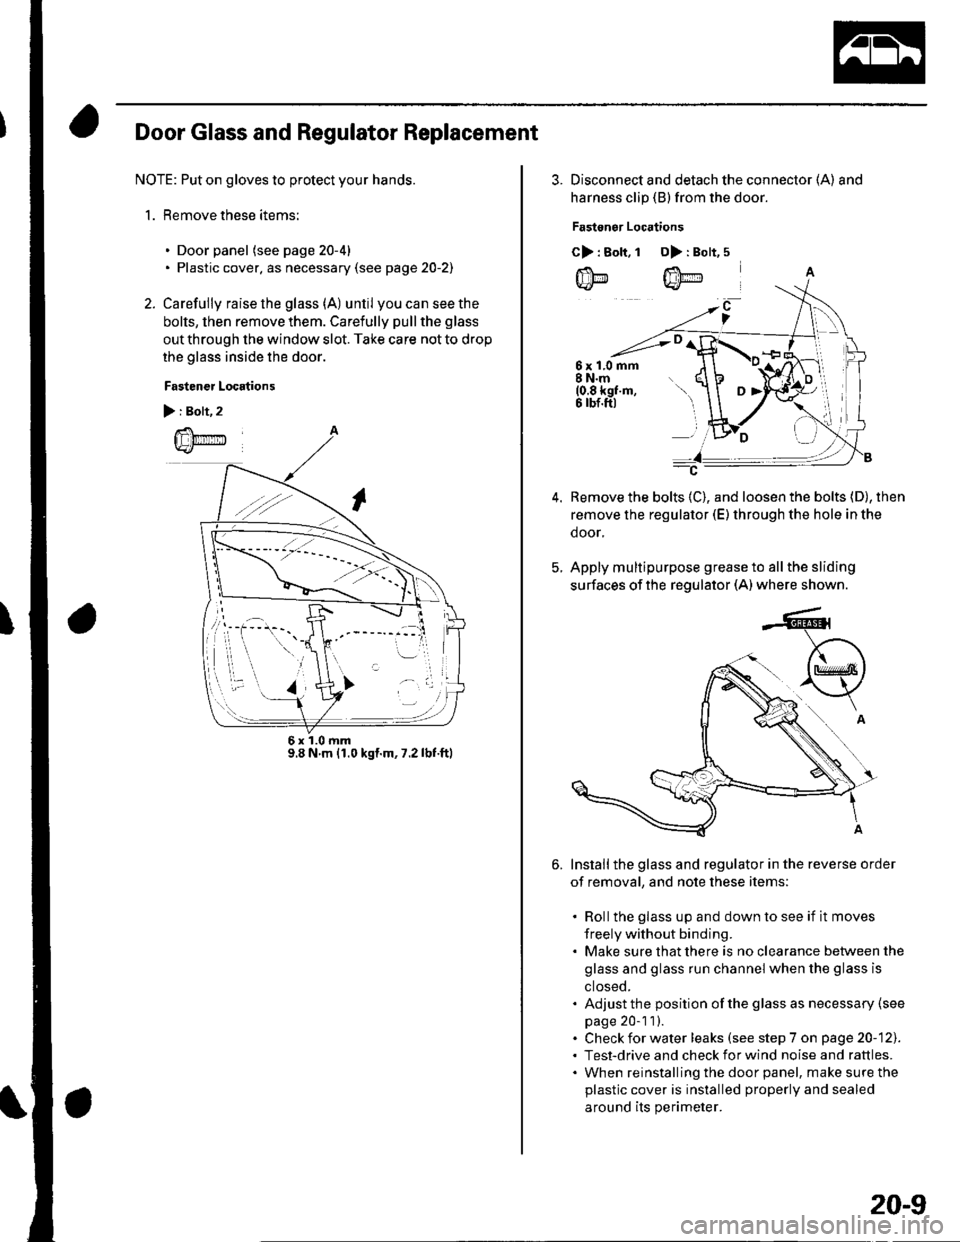 HONDA CIVIC 2003 7.G User Guide Door Glass and Regulator Replacement
NOTE: Put on gloves to protect your hands.
1. Remove these items:
. Door panel (see page 20-4). Plastic cover. as necessary (see page 20-2)
2. Carefully raise the 